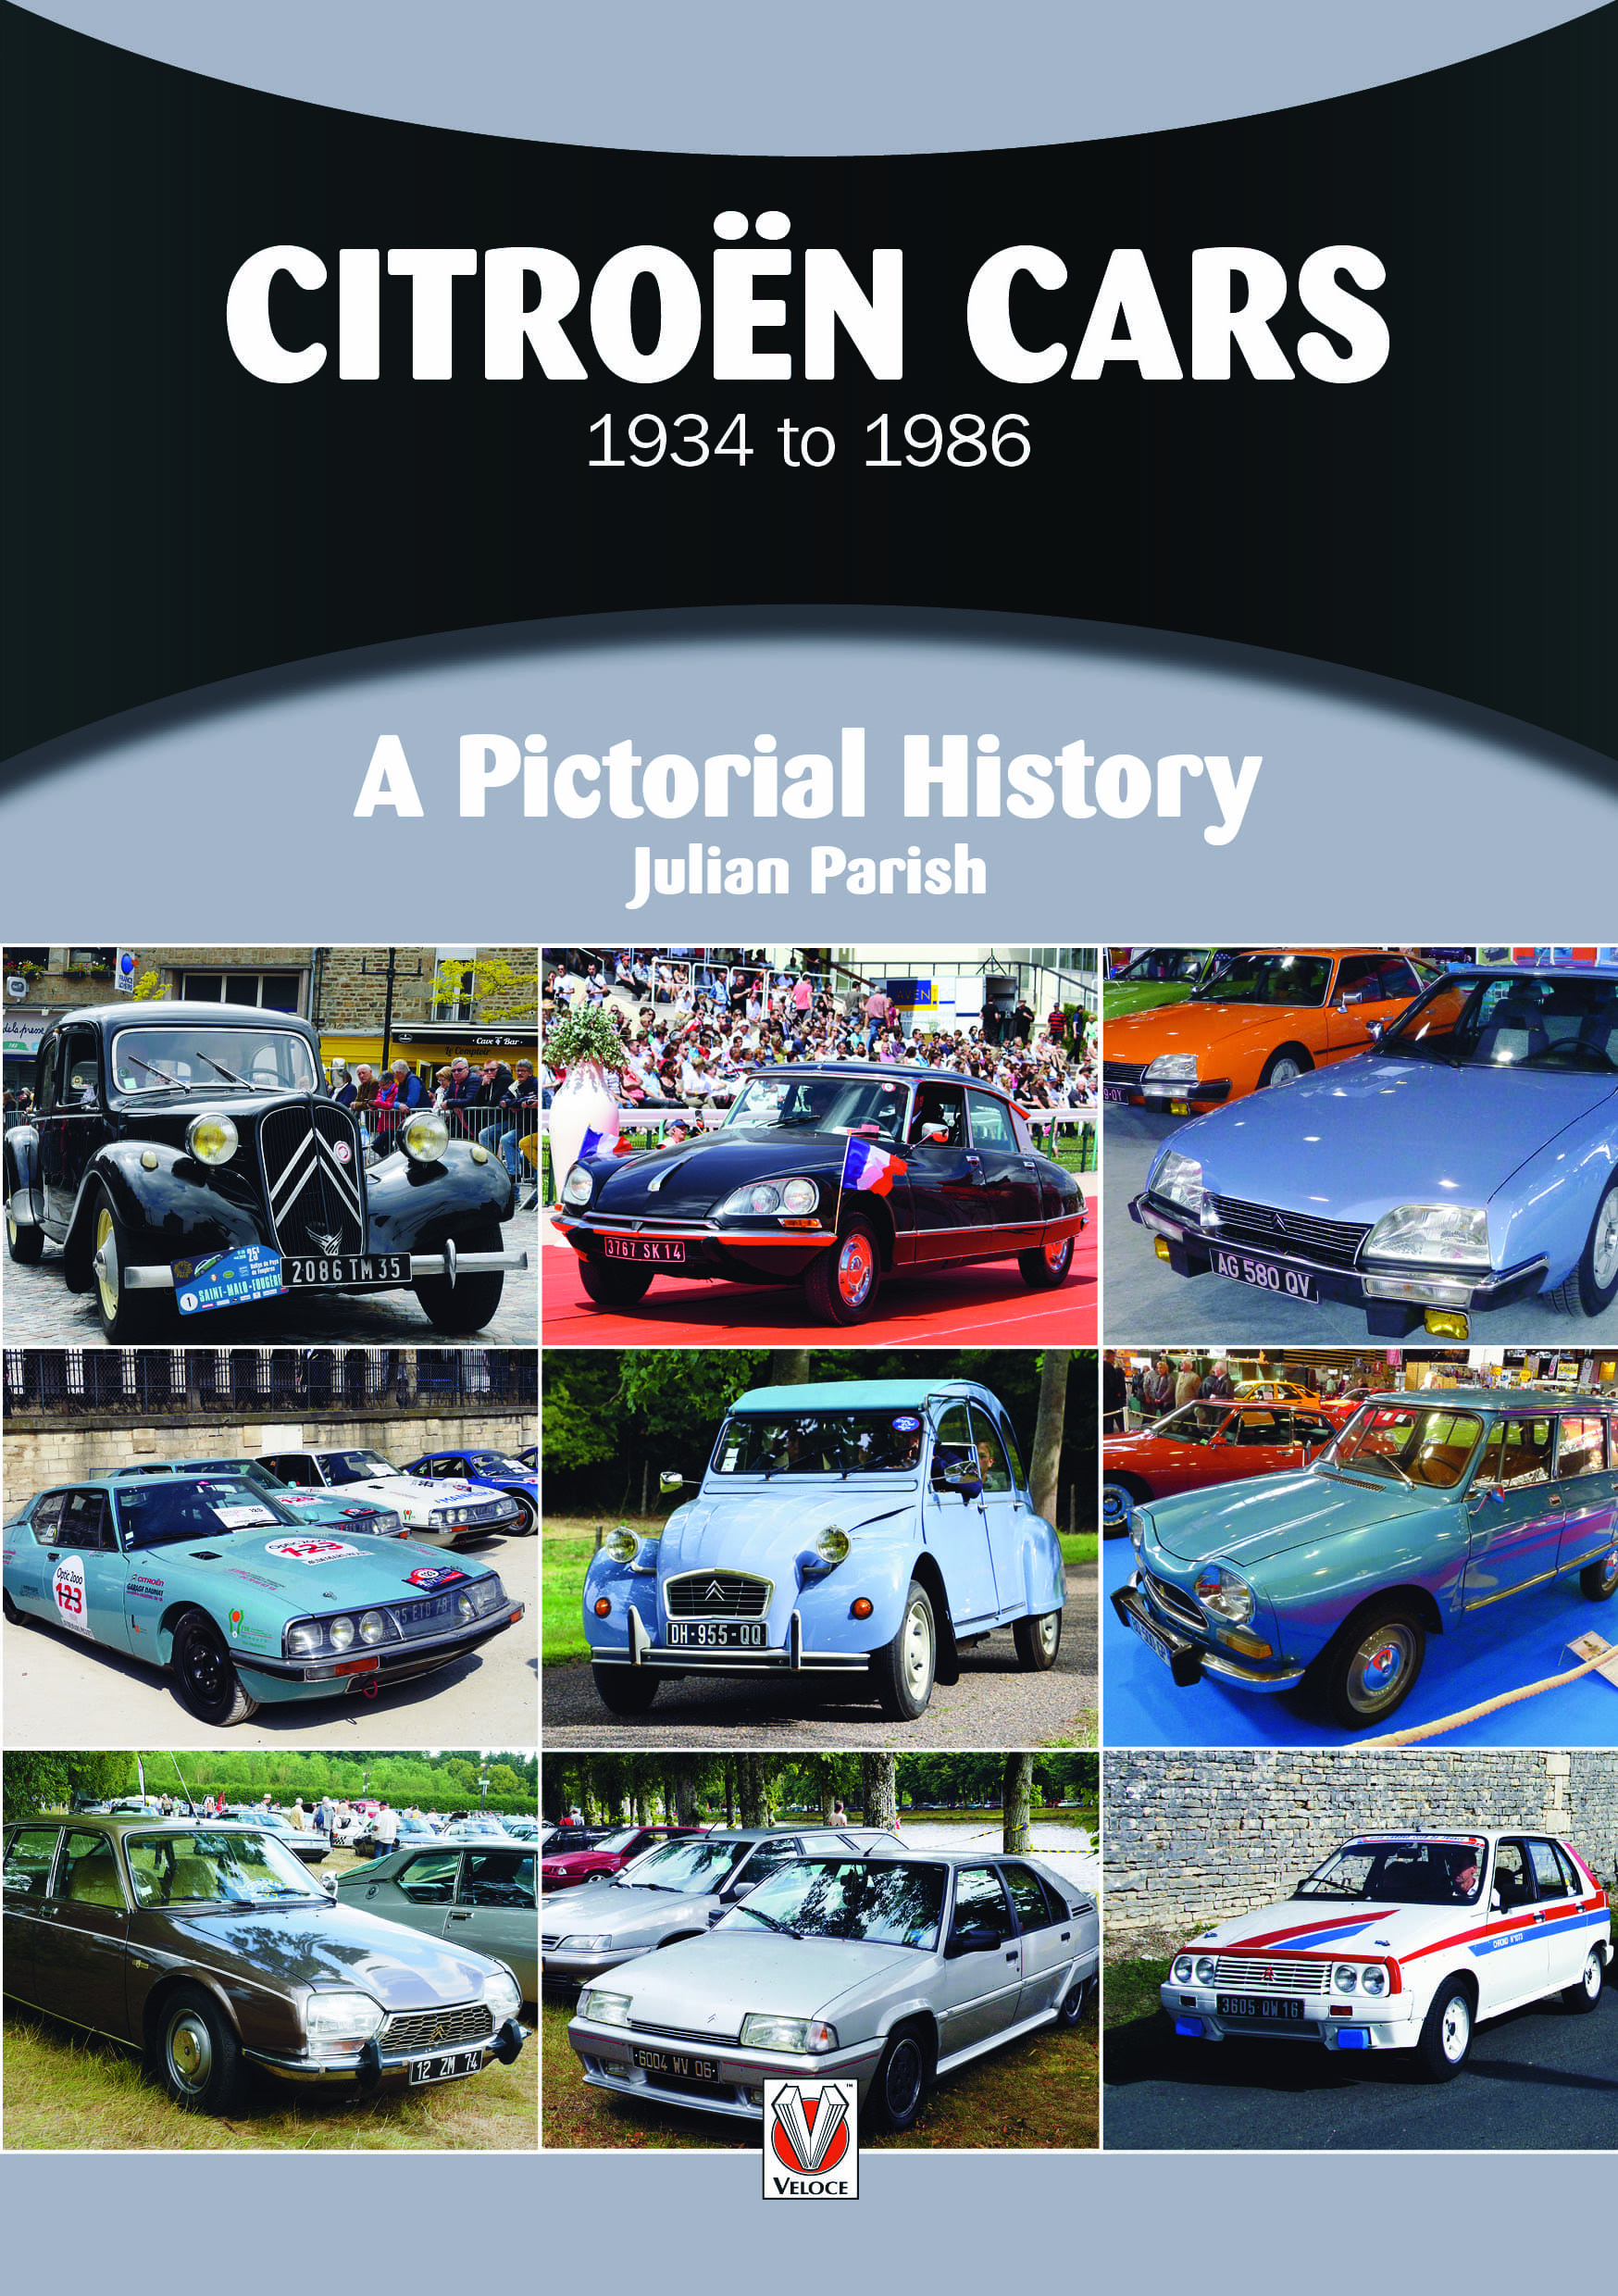 Citroën Cars 1934 to 1986  - A Pictorial History